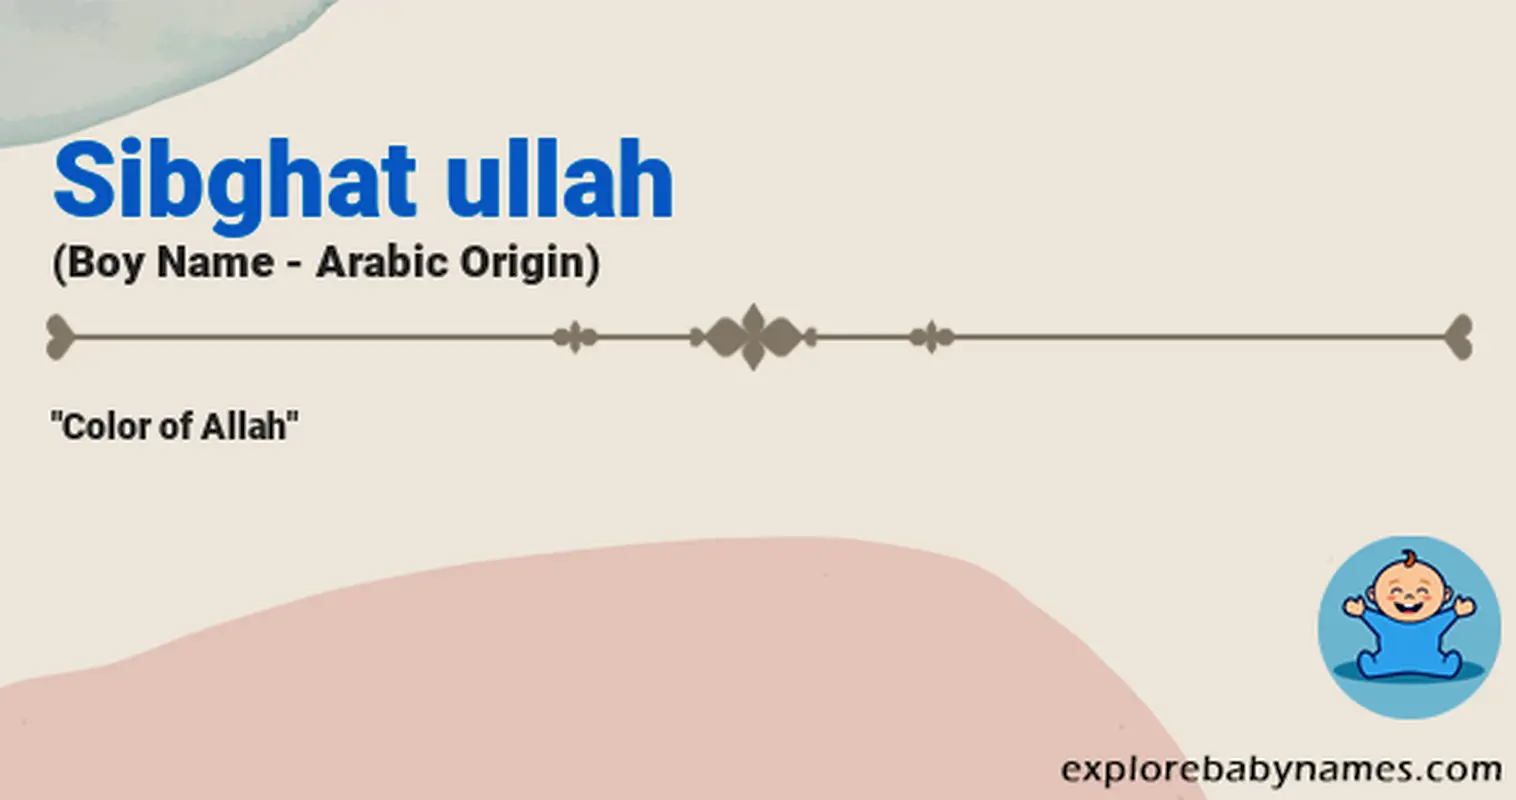 Meaning of Sibghat ullah